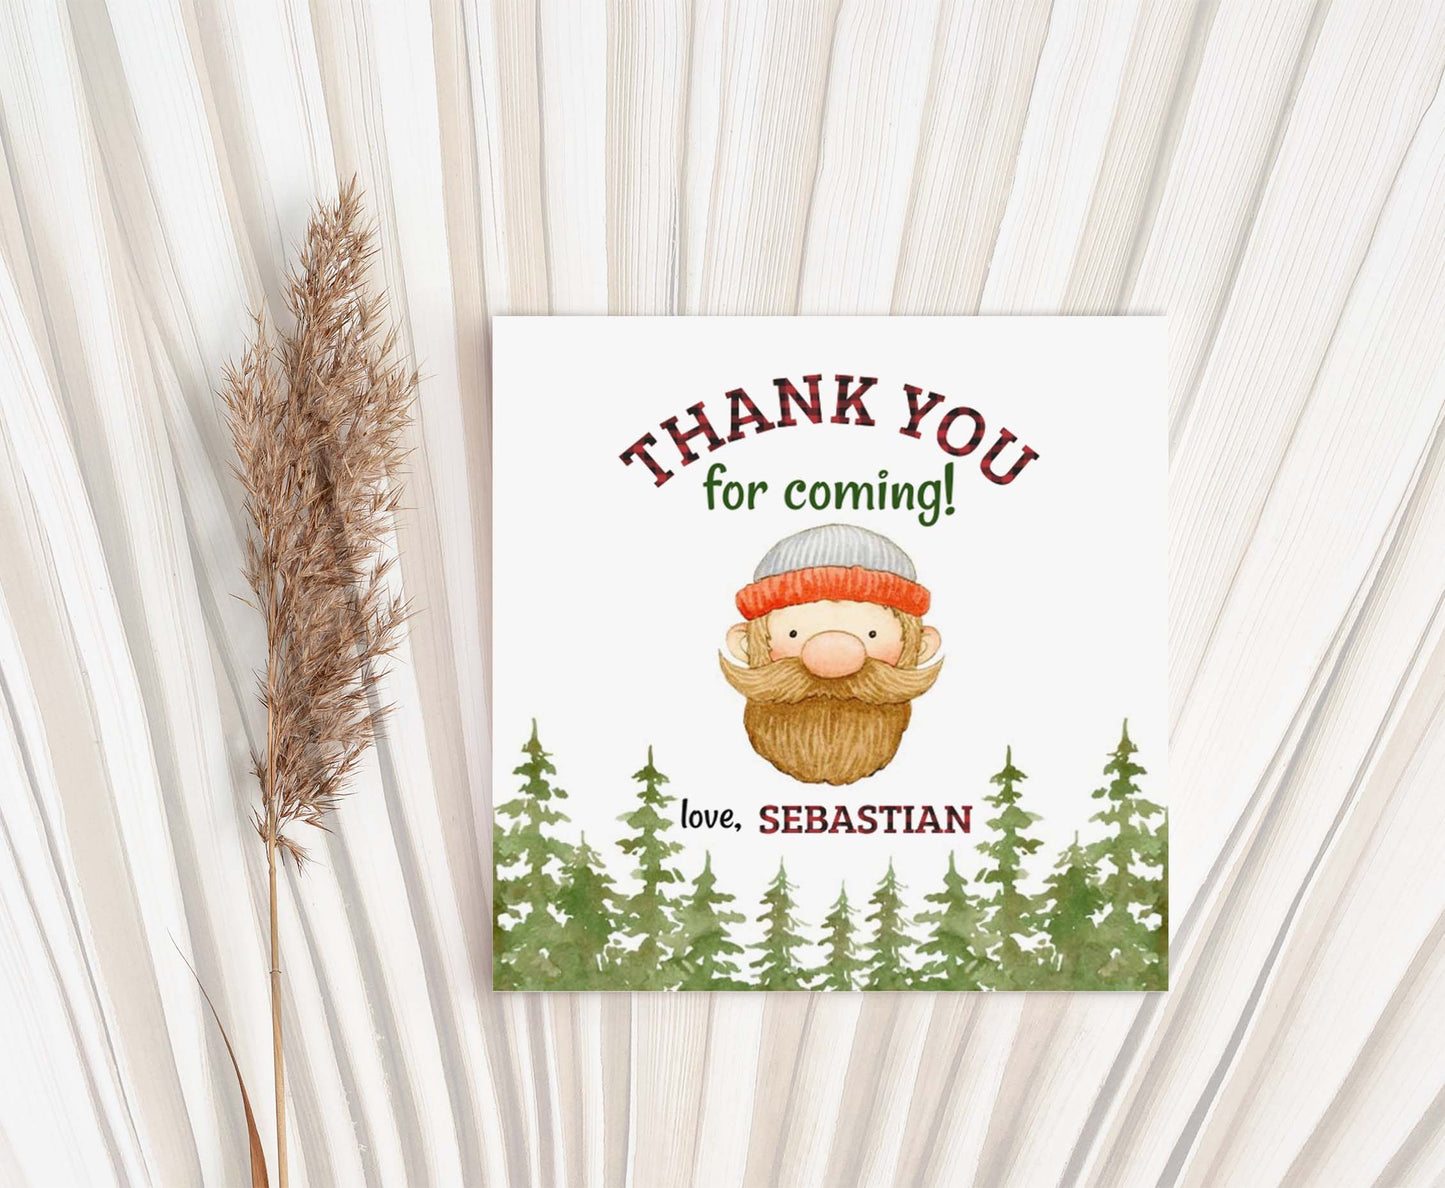 Editable Lumberjack Thank You Tags 2"x2" Round and Square | Lumberjack Birthday Party Decorations - 19A